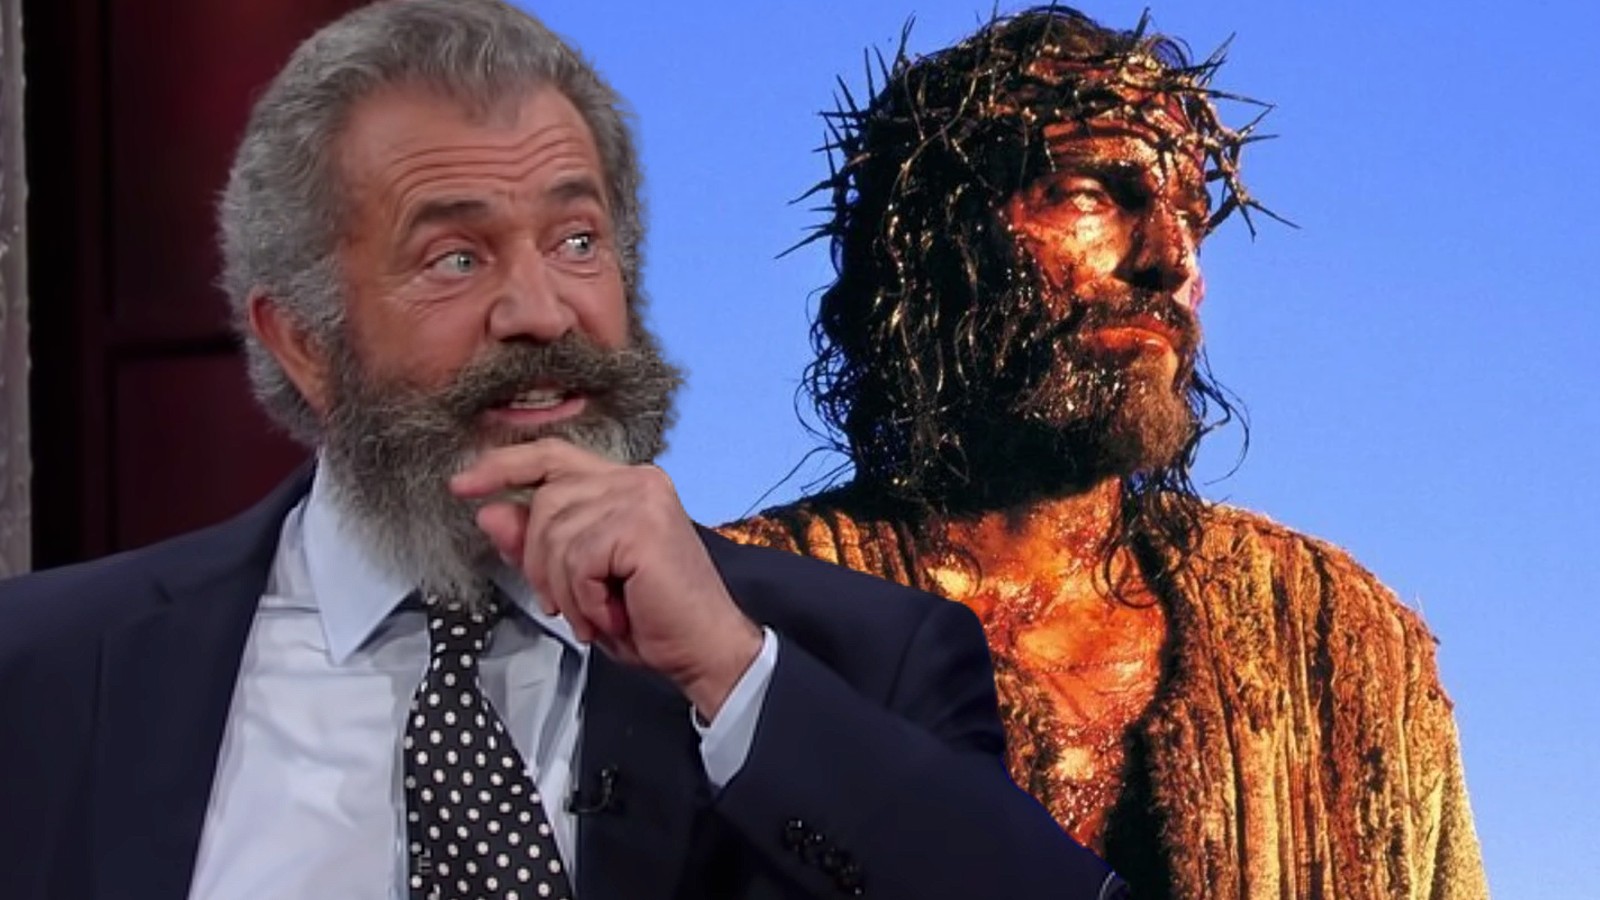 The Passion of the Christ 2 is filming this year – yes, really ...